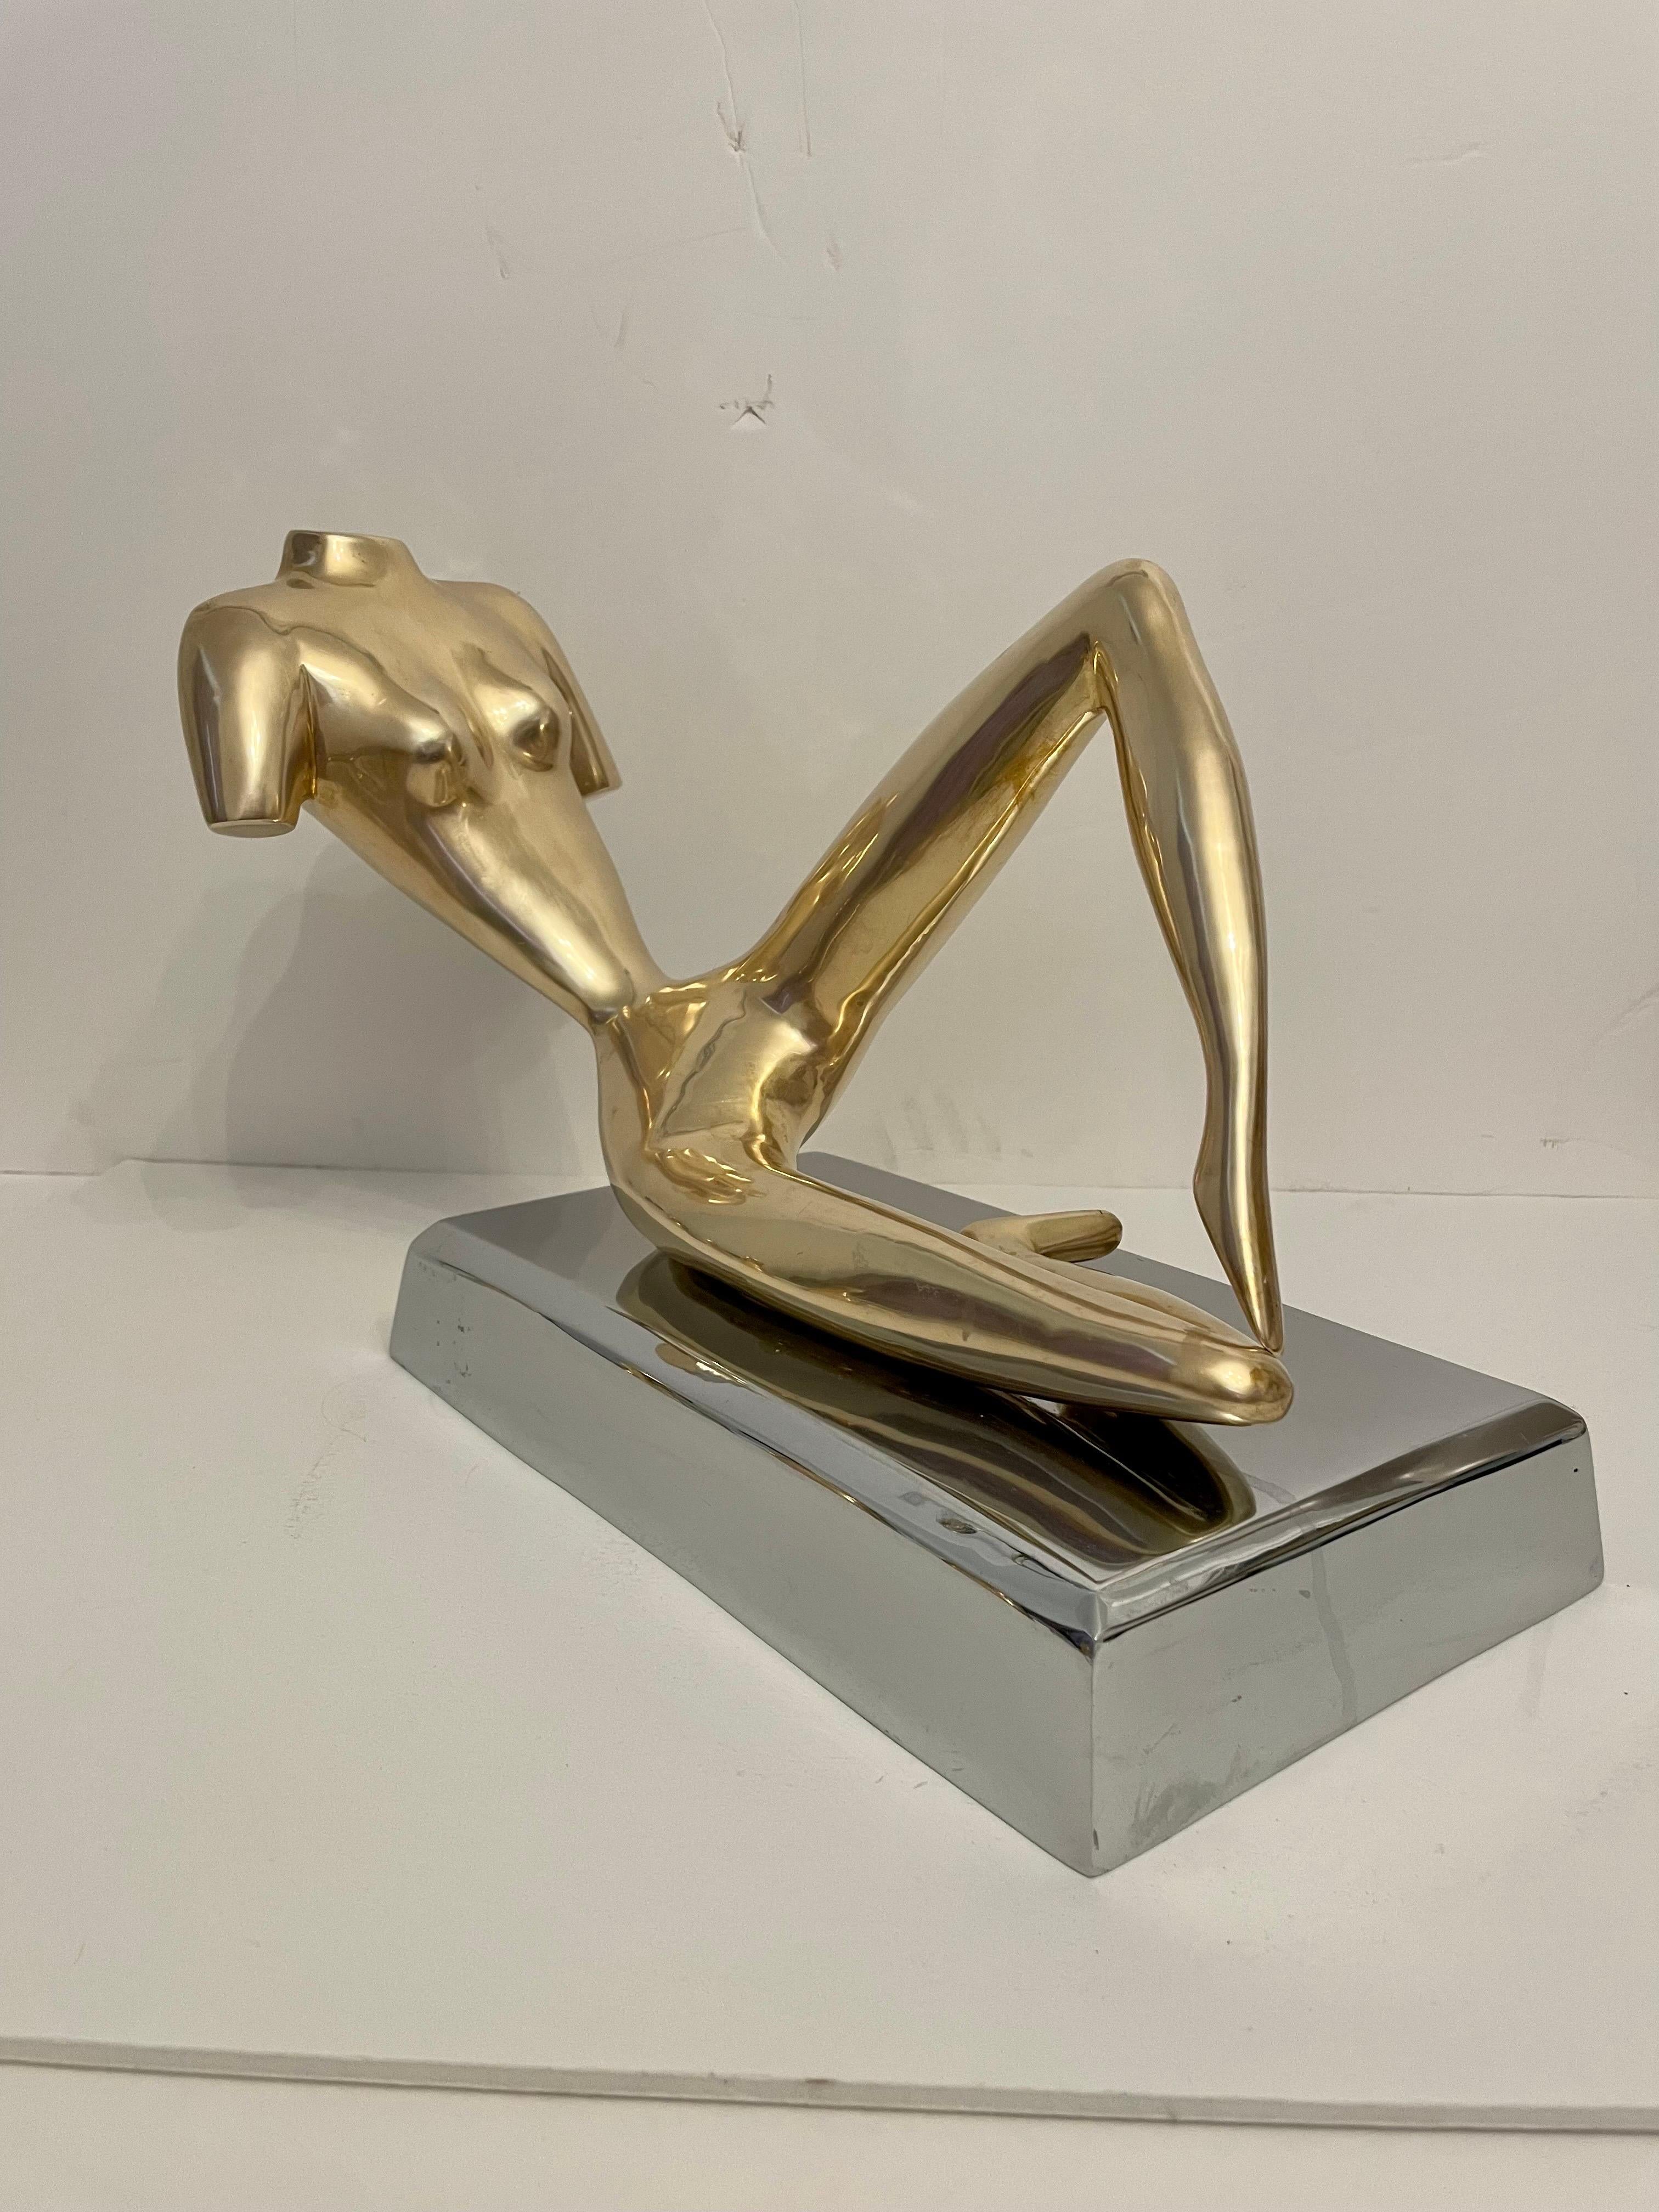 Large Midcentury Brass Reclining Nude Sculpture in the Manner of Jean Arp For Sale 7